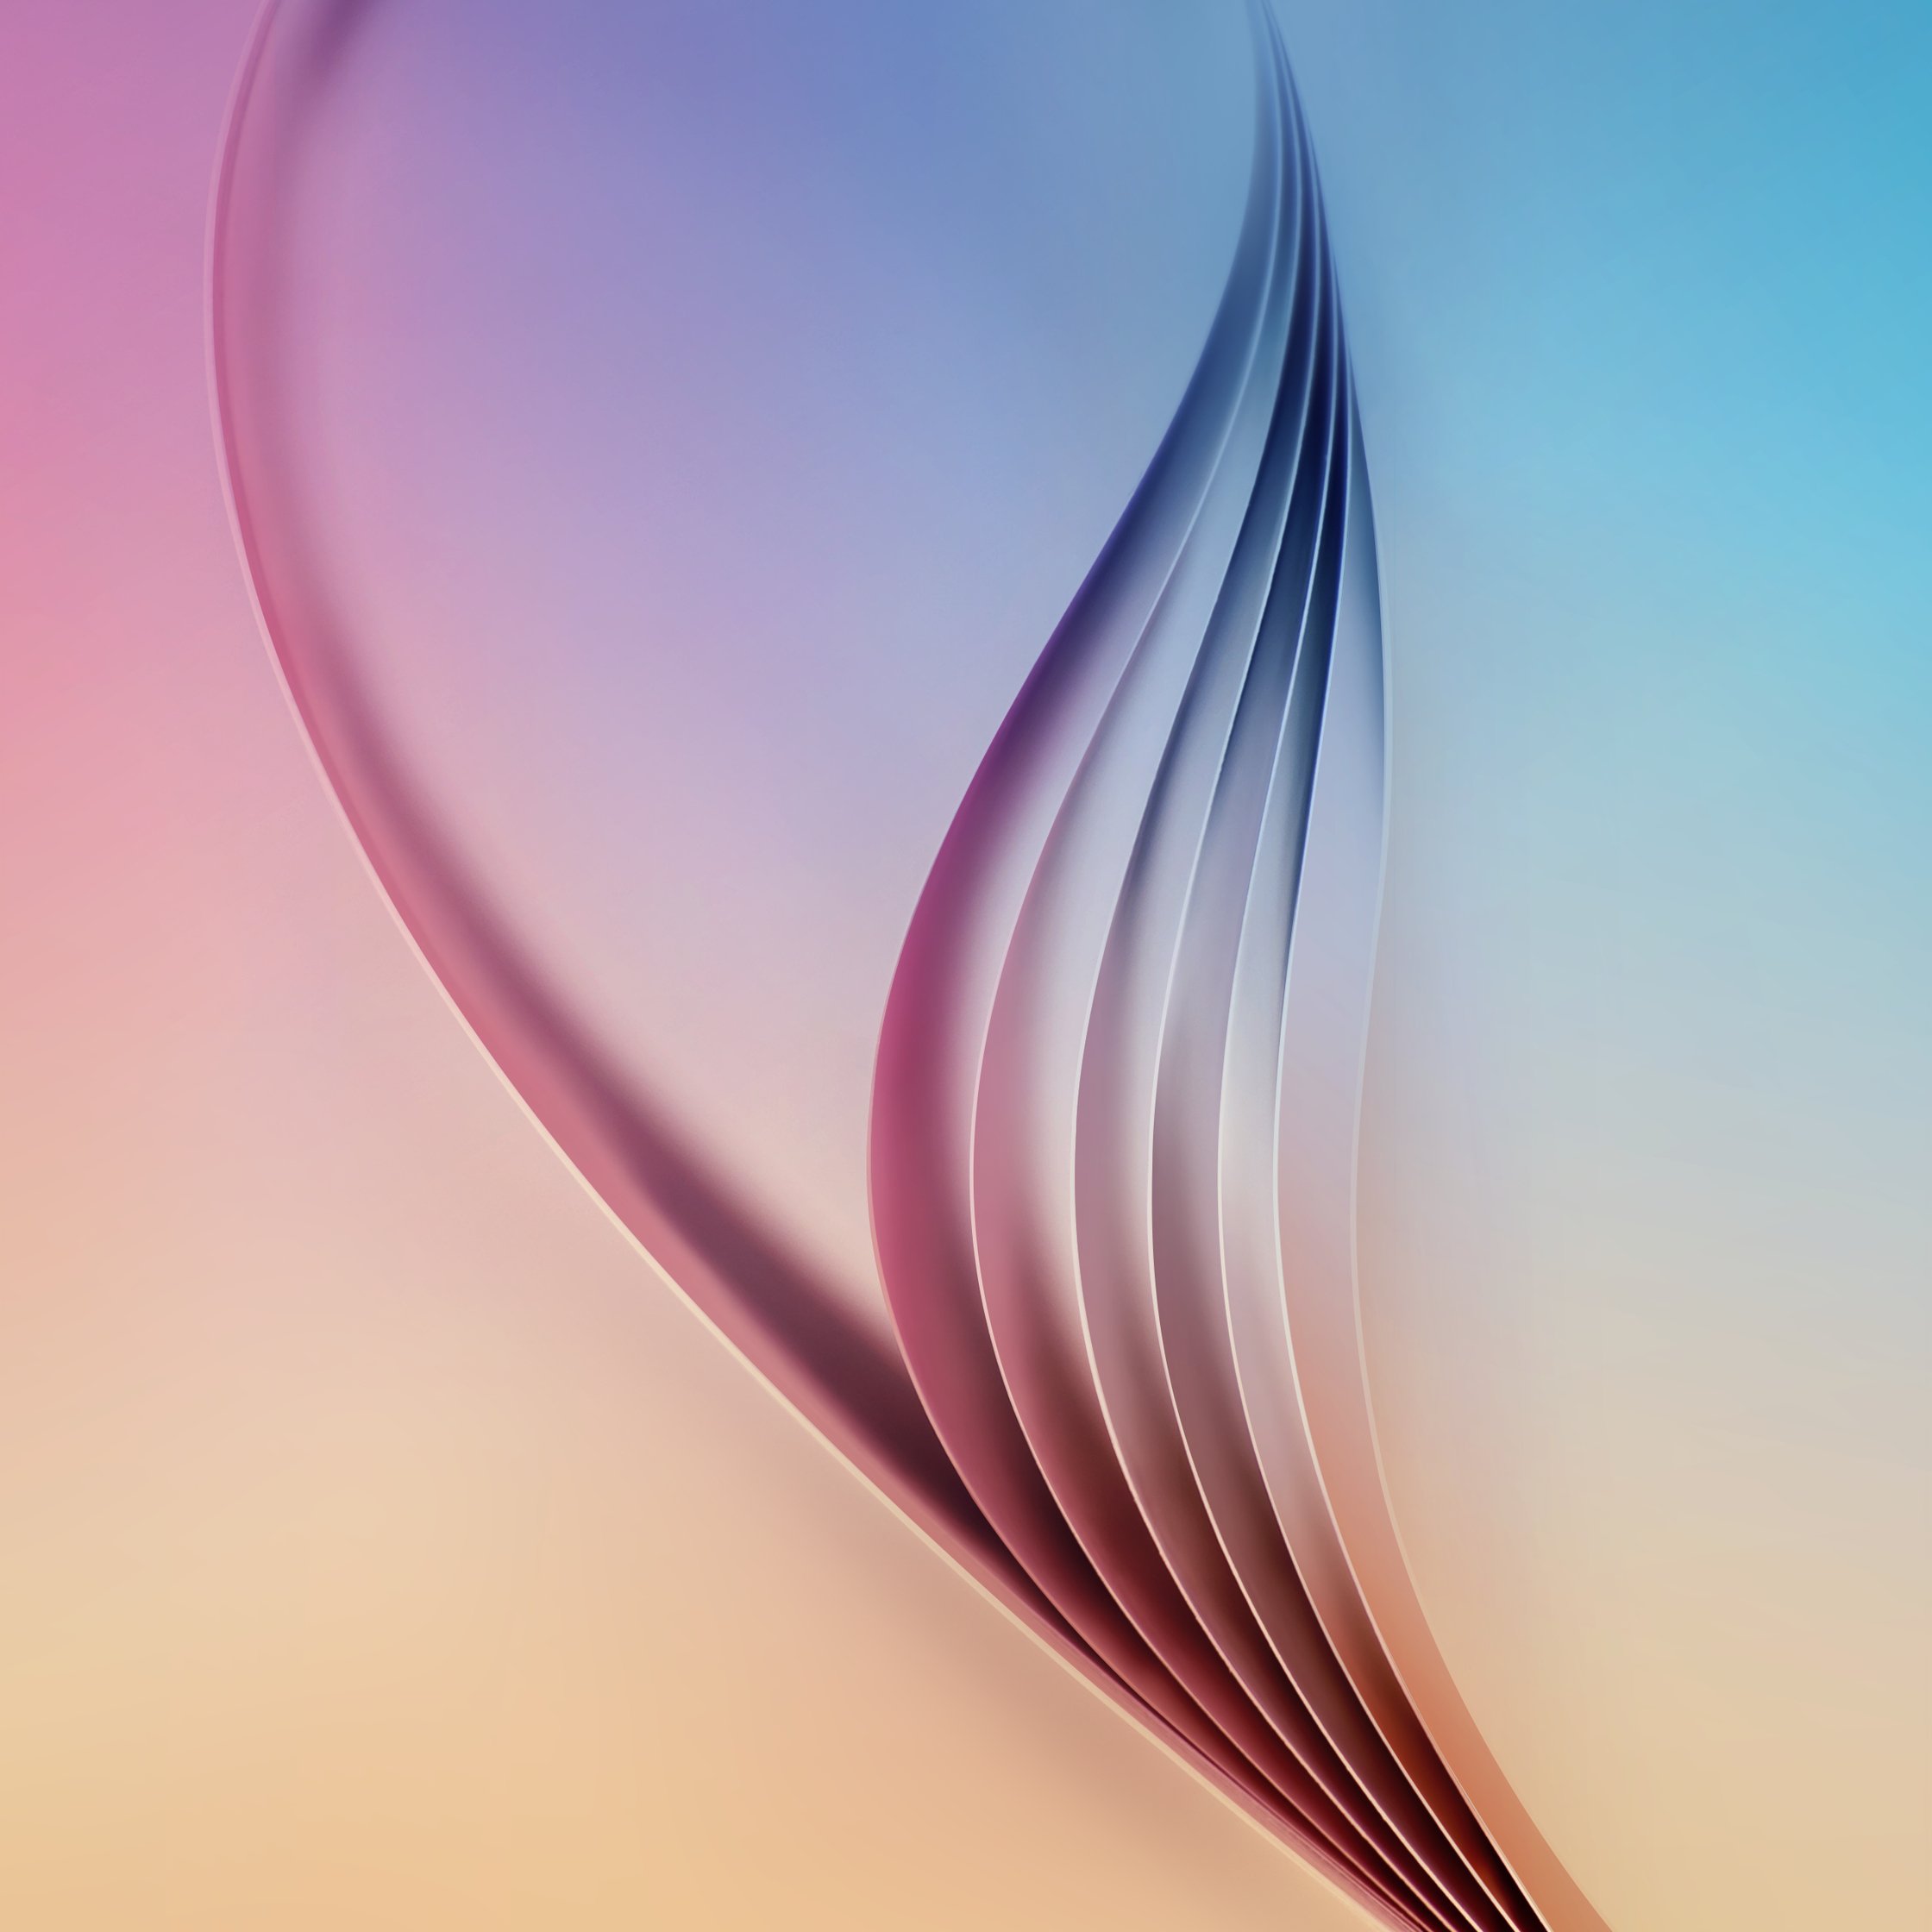  gift from SamMobile Galaxy S6 and Galaxy S6 Edge default wallpapers 2240x2240